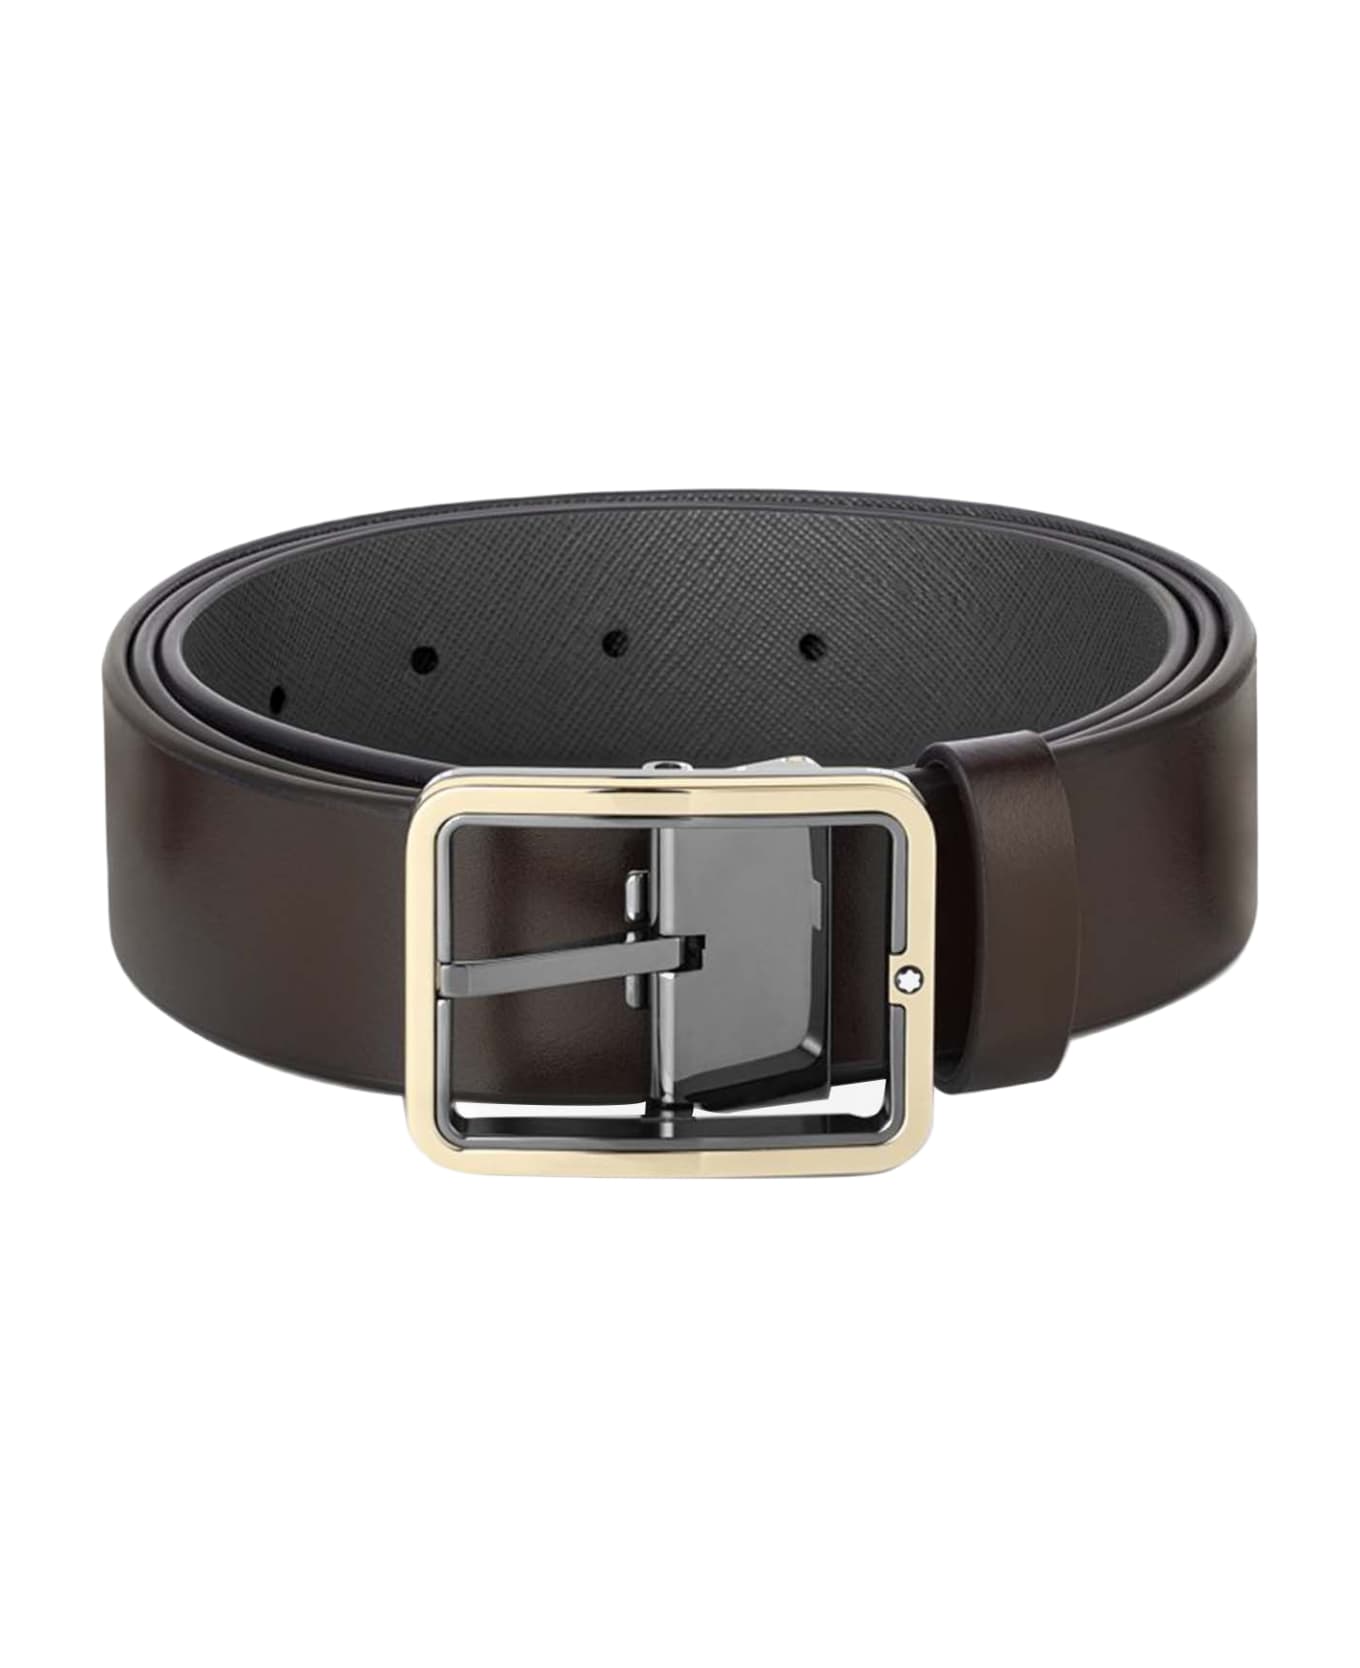 Montblanc 35mm Reversible Leather Belt - Brown